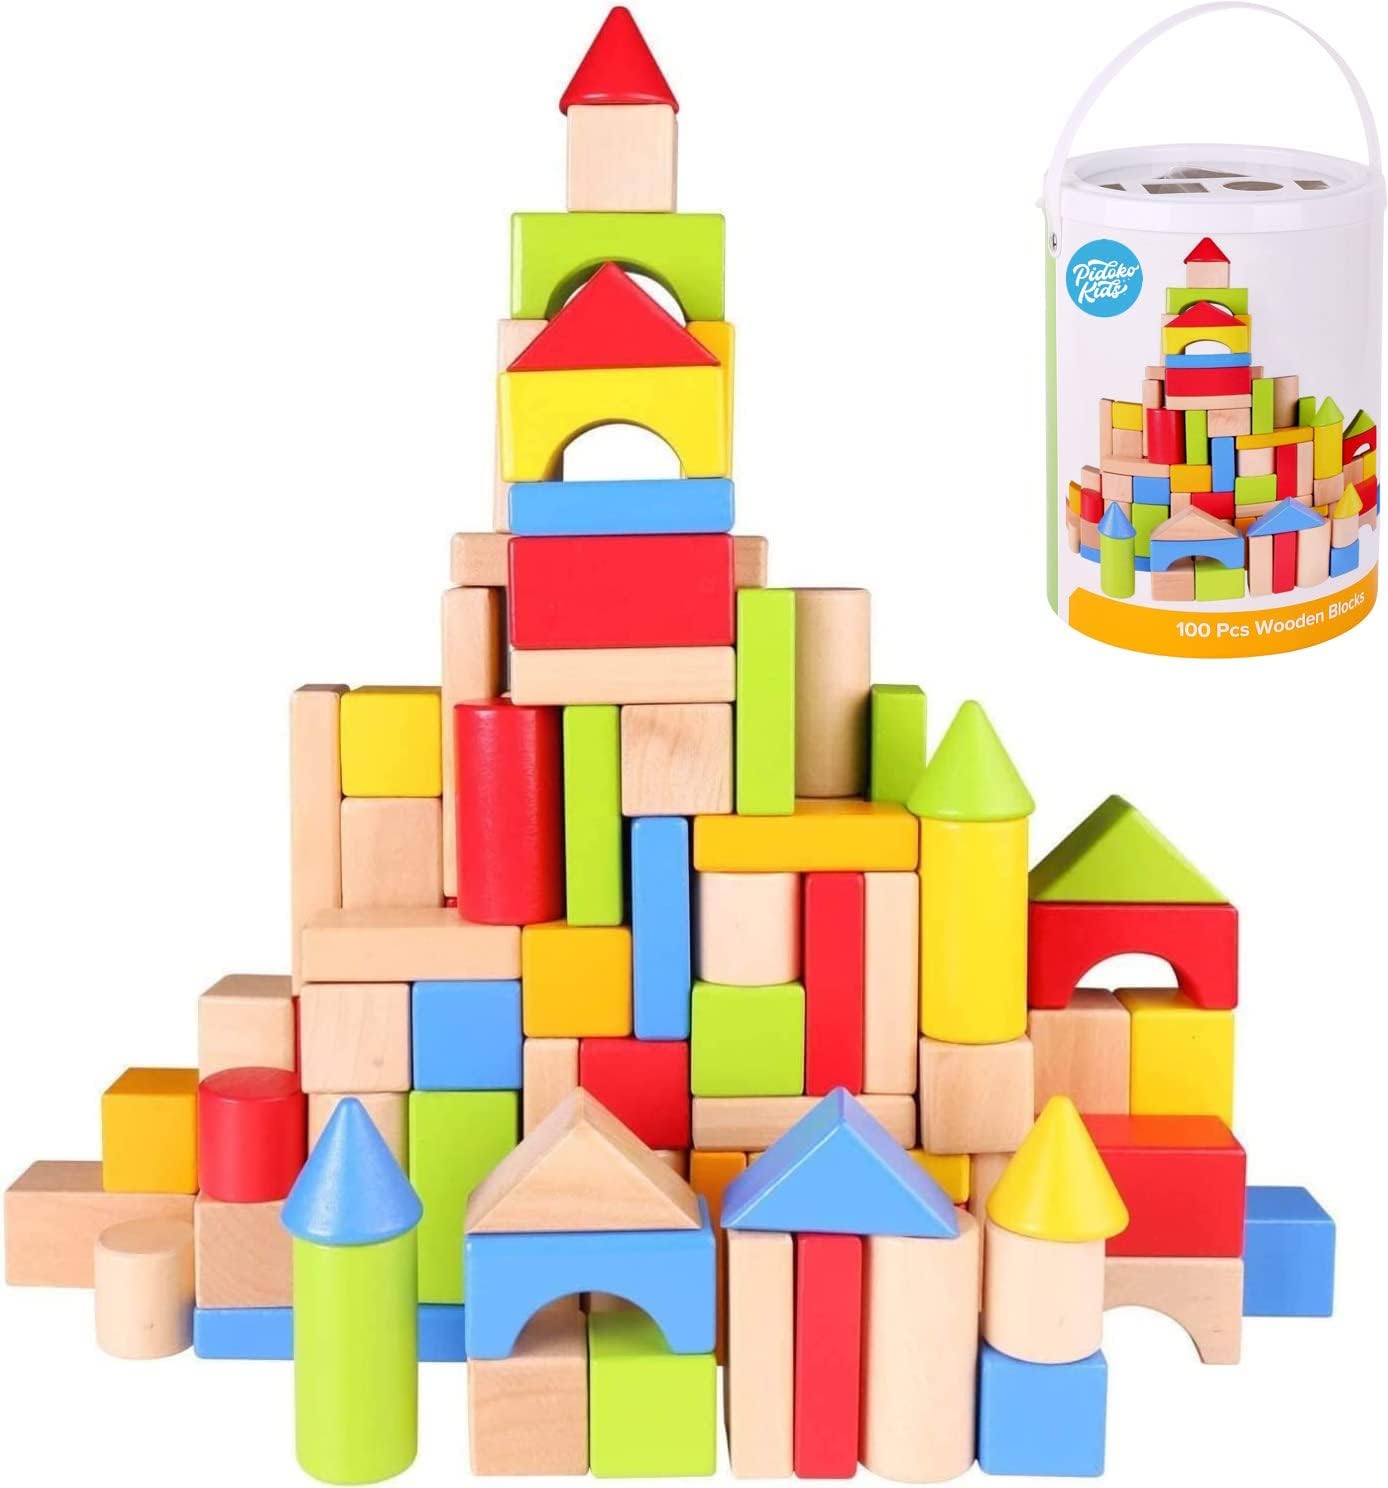 Pidoko Kids Wooden Building Blocks Set - 100 Pcs - Includes Carrying Container - Hardwood Plain & Colored Wood Block for Boys & Girls